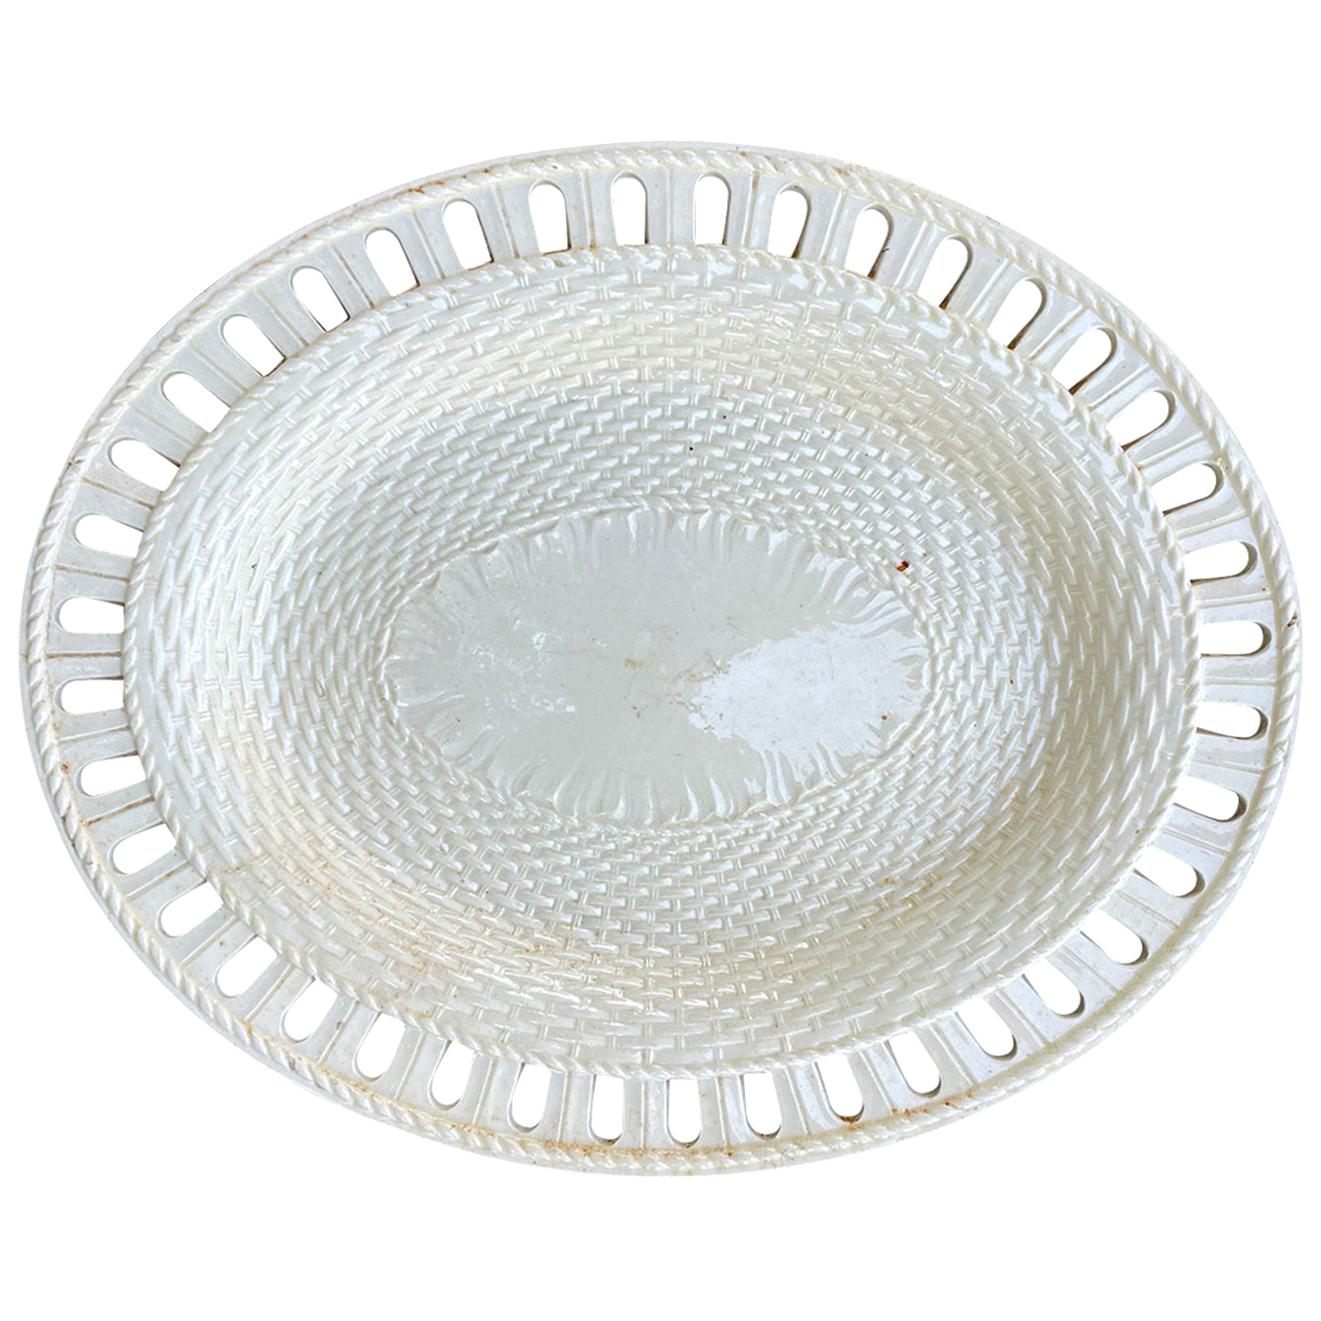 Early 19th Century Single Reticulated Creamware Oval Plate, Unmarked